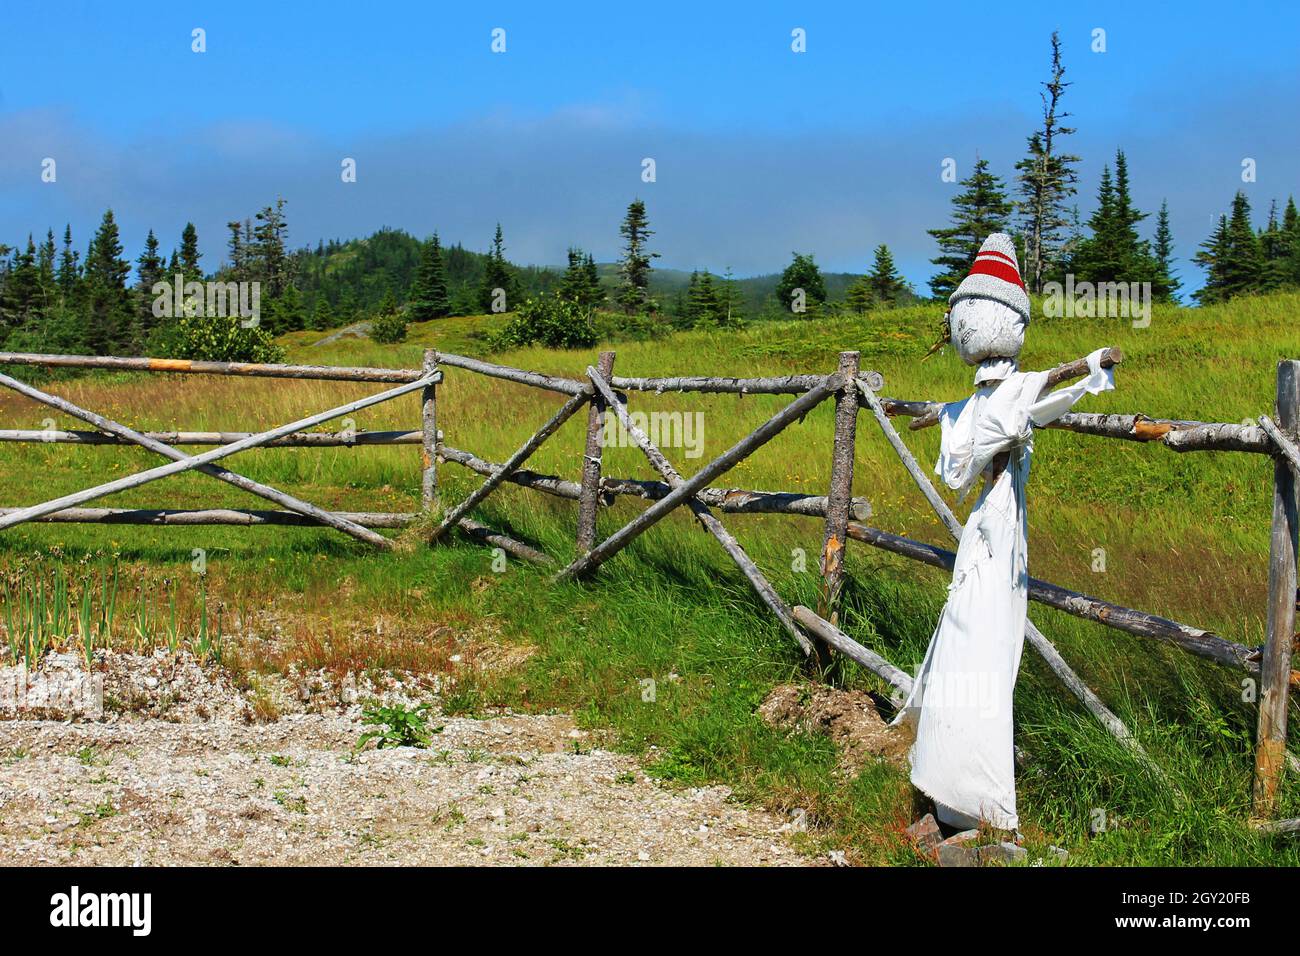 A scarecrow in a small vegetable garden enclosed by a rustic log fence, Random Passage site, New Bonaventure, Newfoundland Labrador. Stock Photo